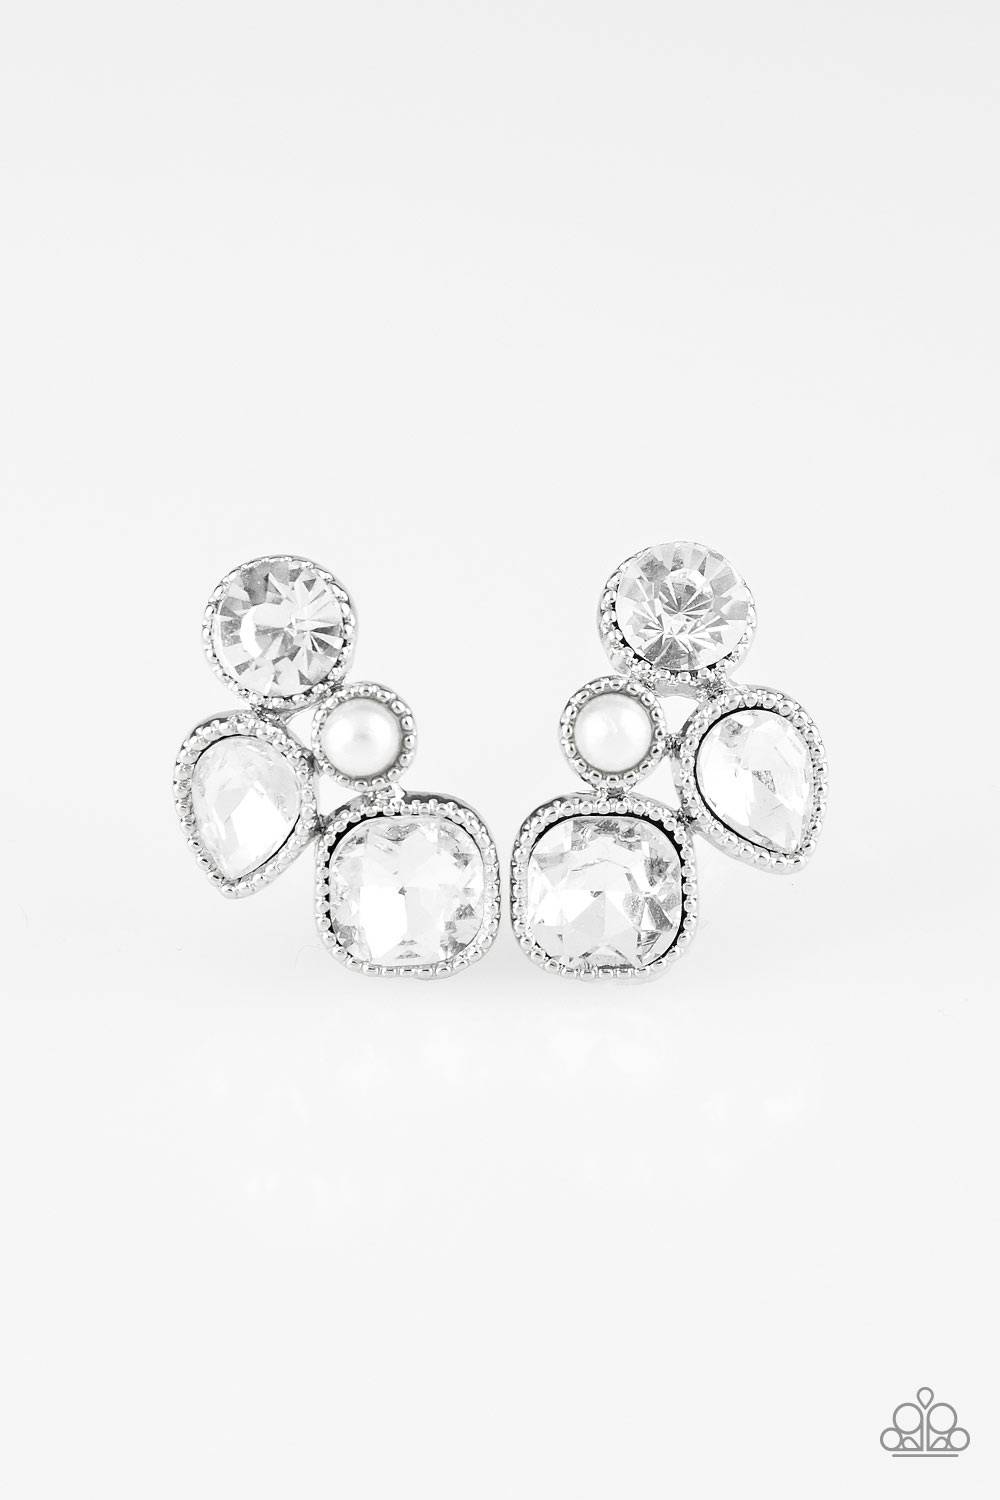 D124 - Super Superstar White Earrings by Paparazzi Accessories on Fancy5Fashion.com